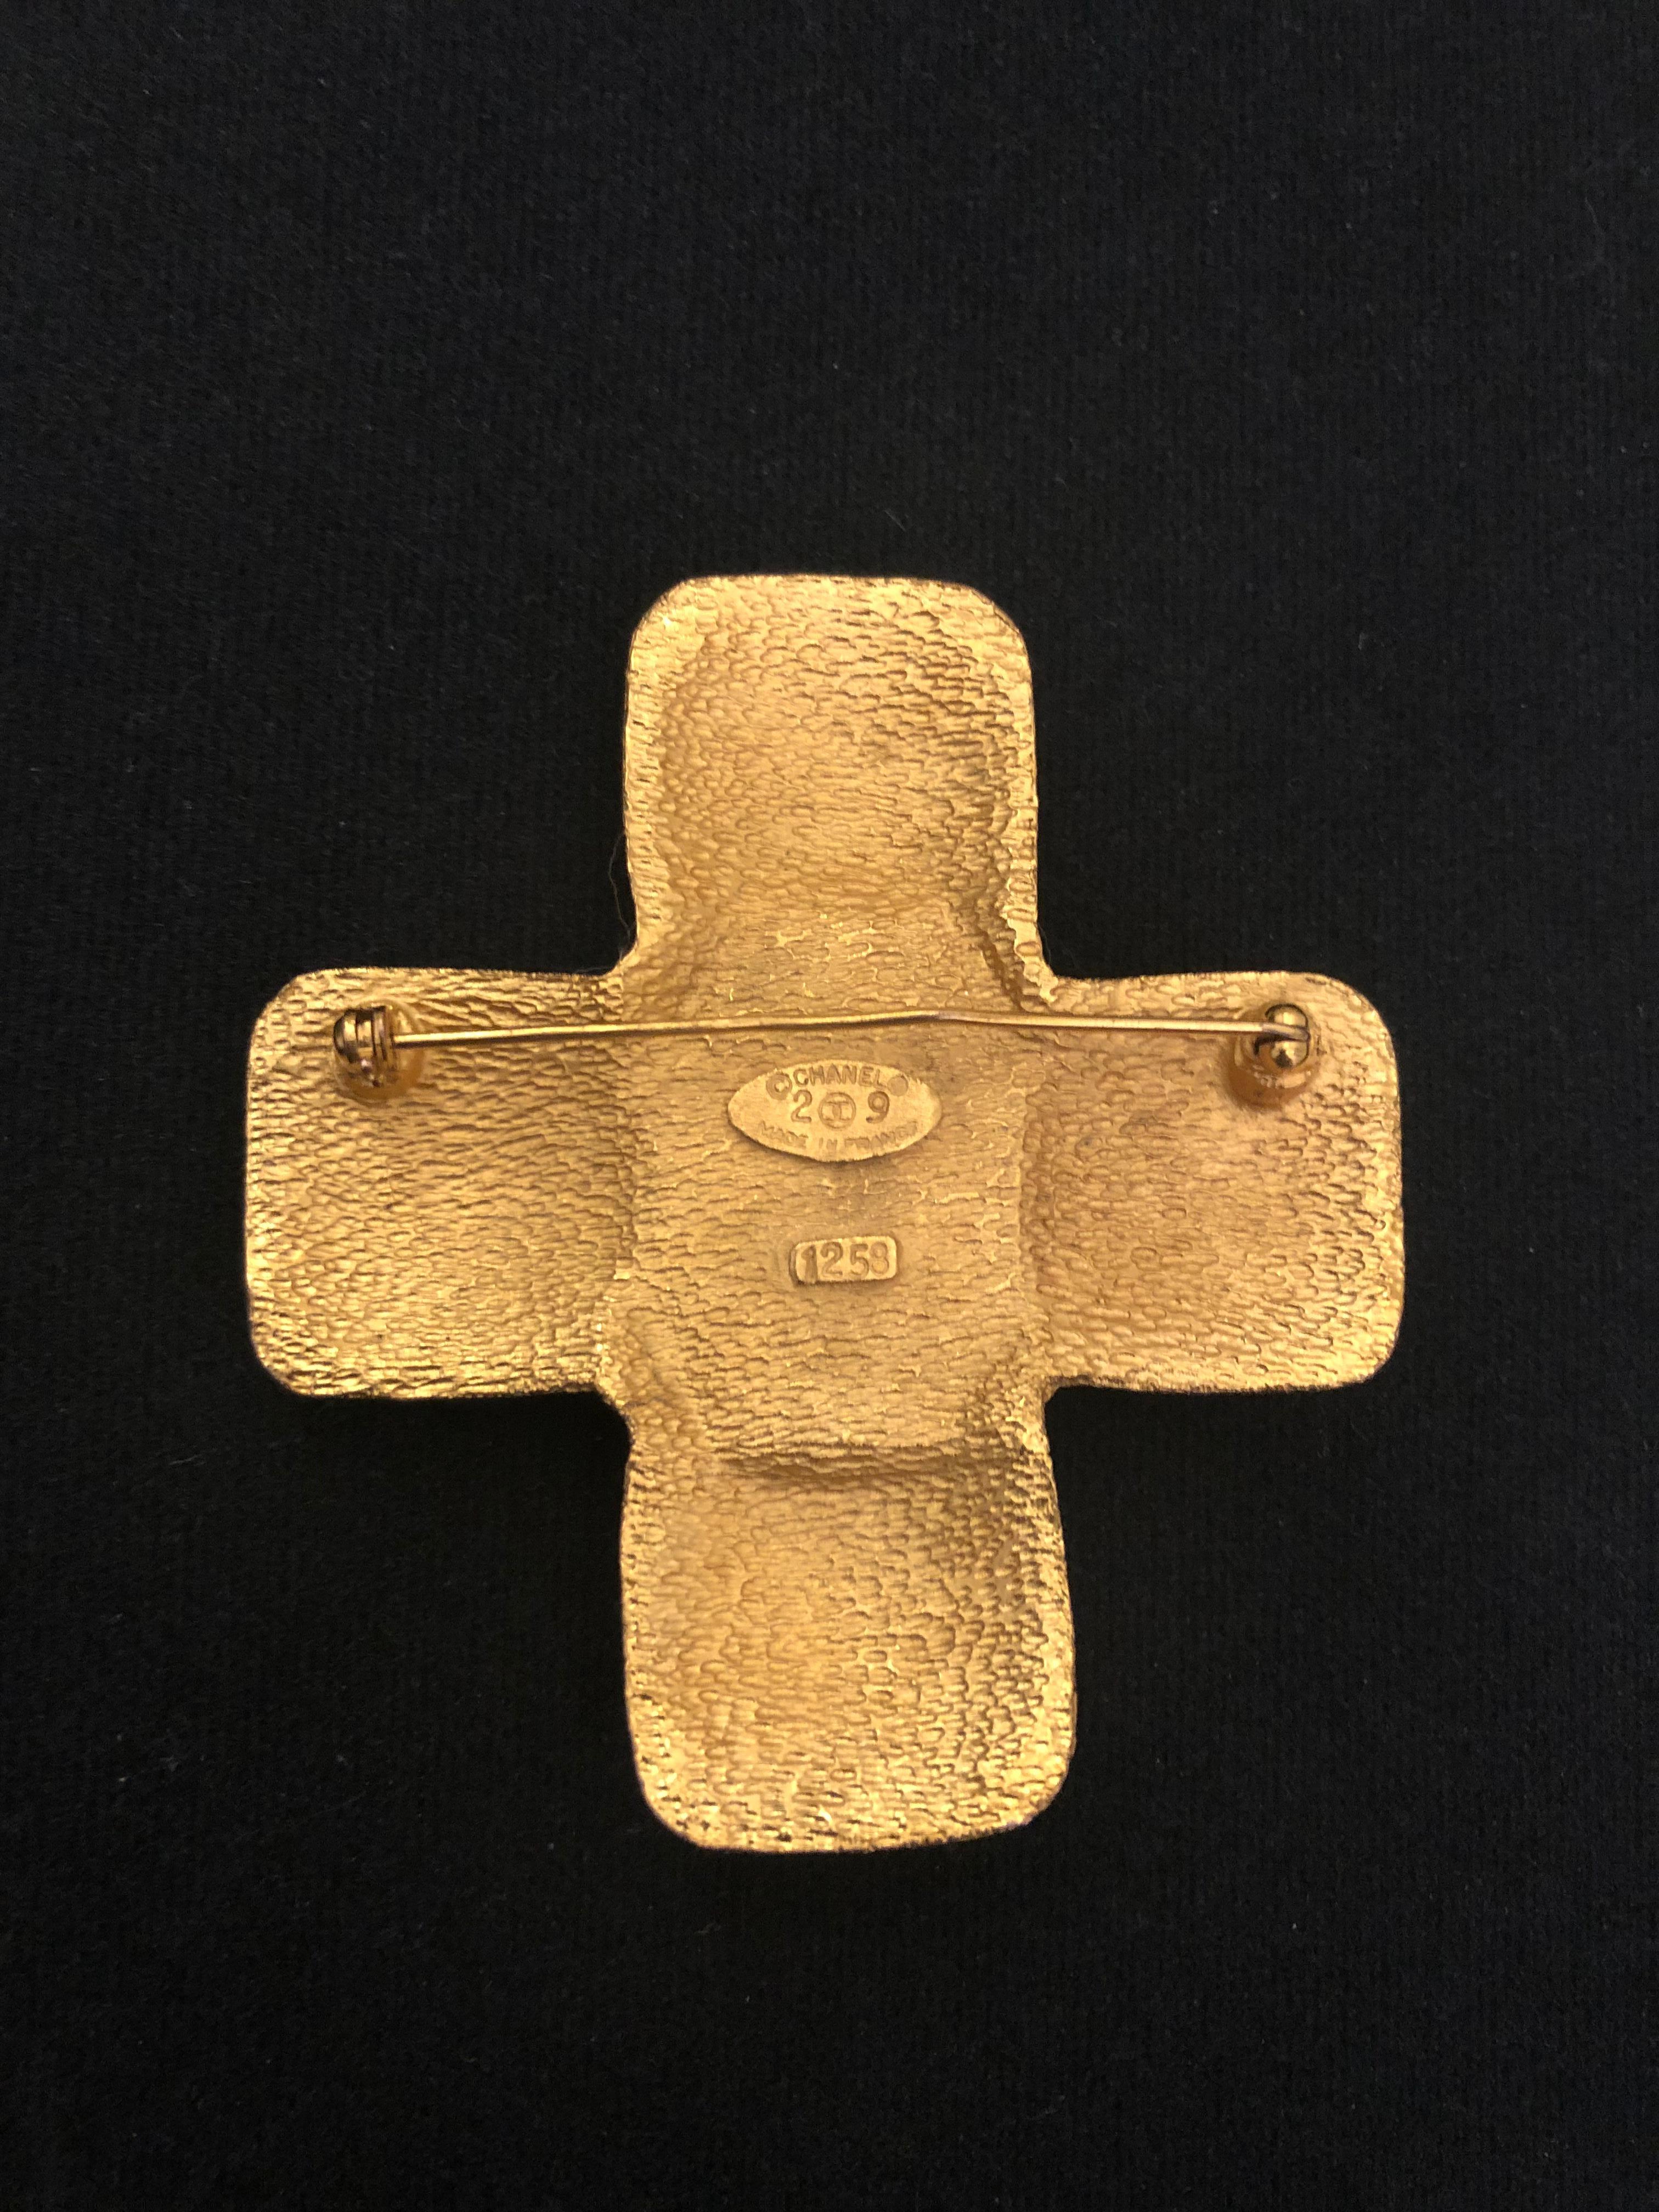 1990s Vintage CHANEL Gold Toned Blue Gripoix CC Cross Brooch For Sale 1